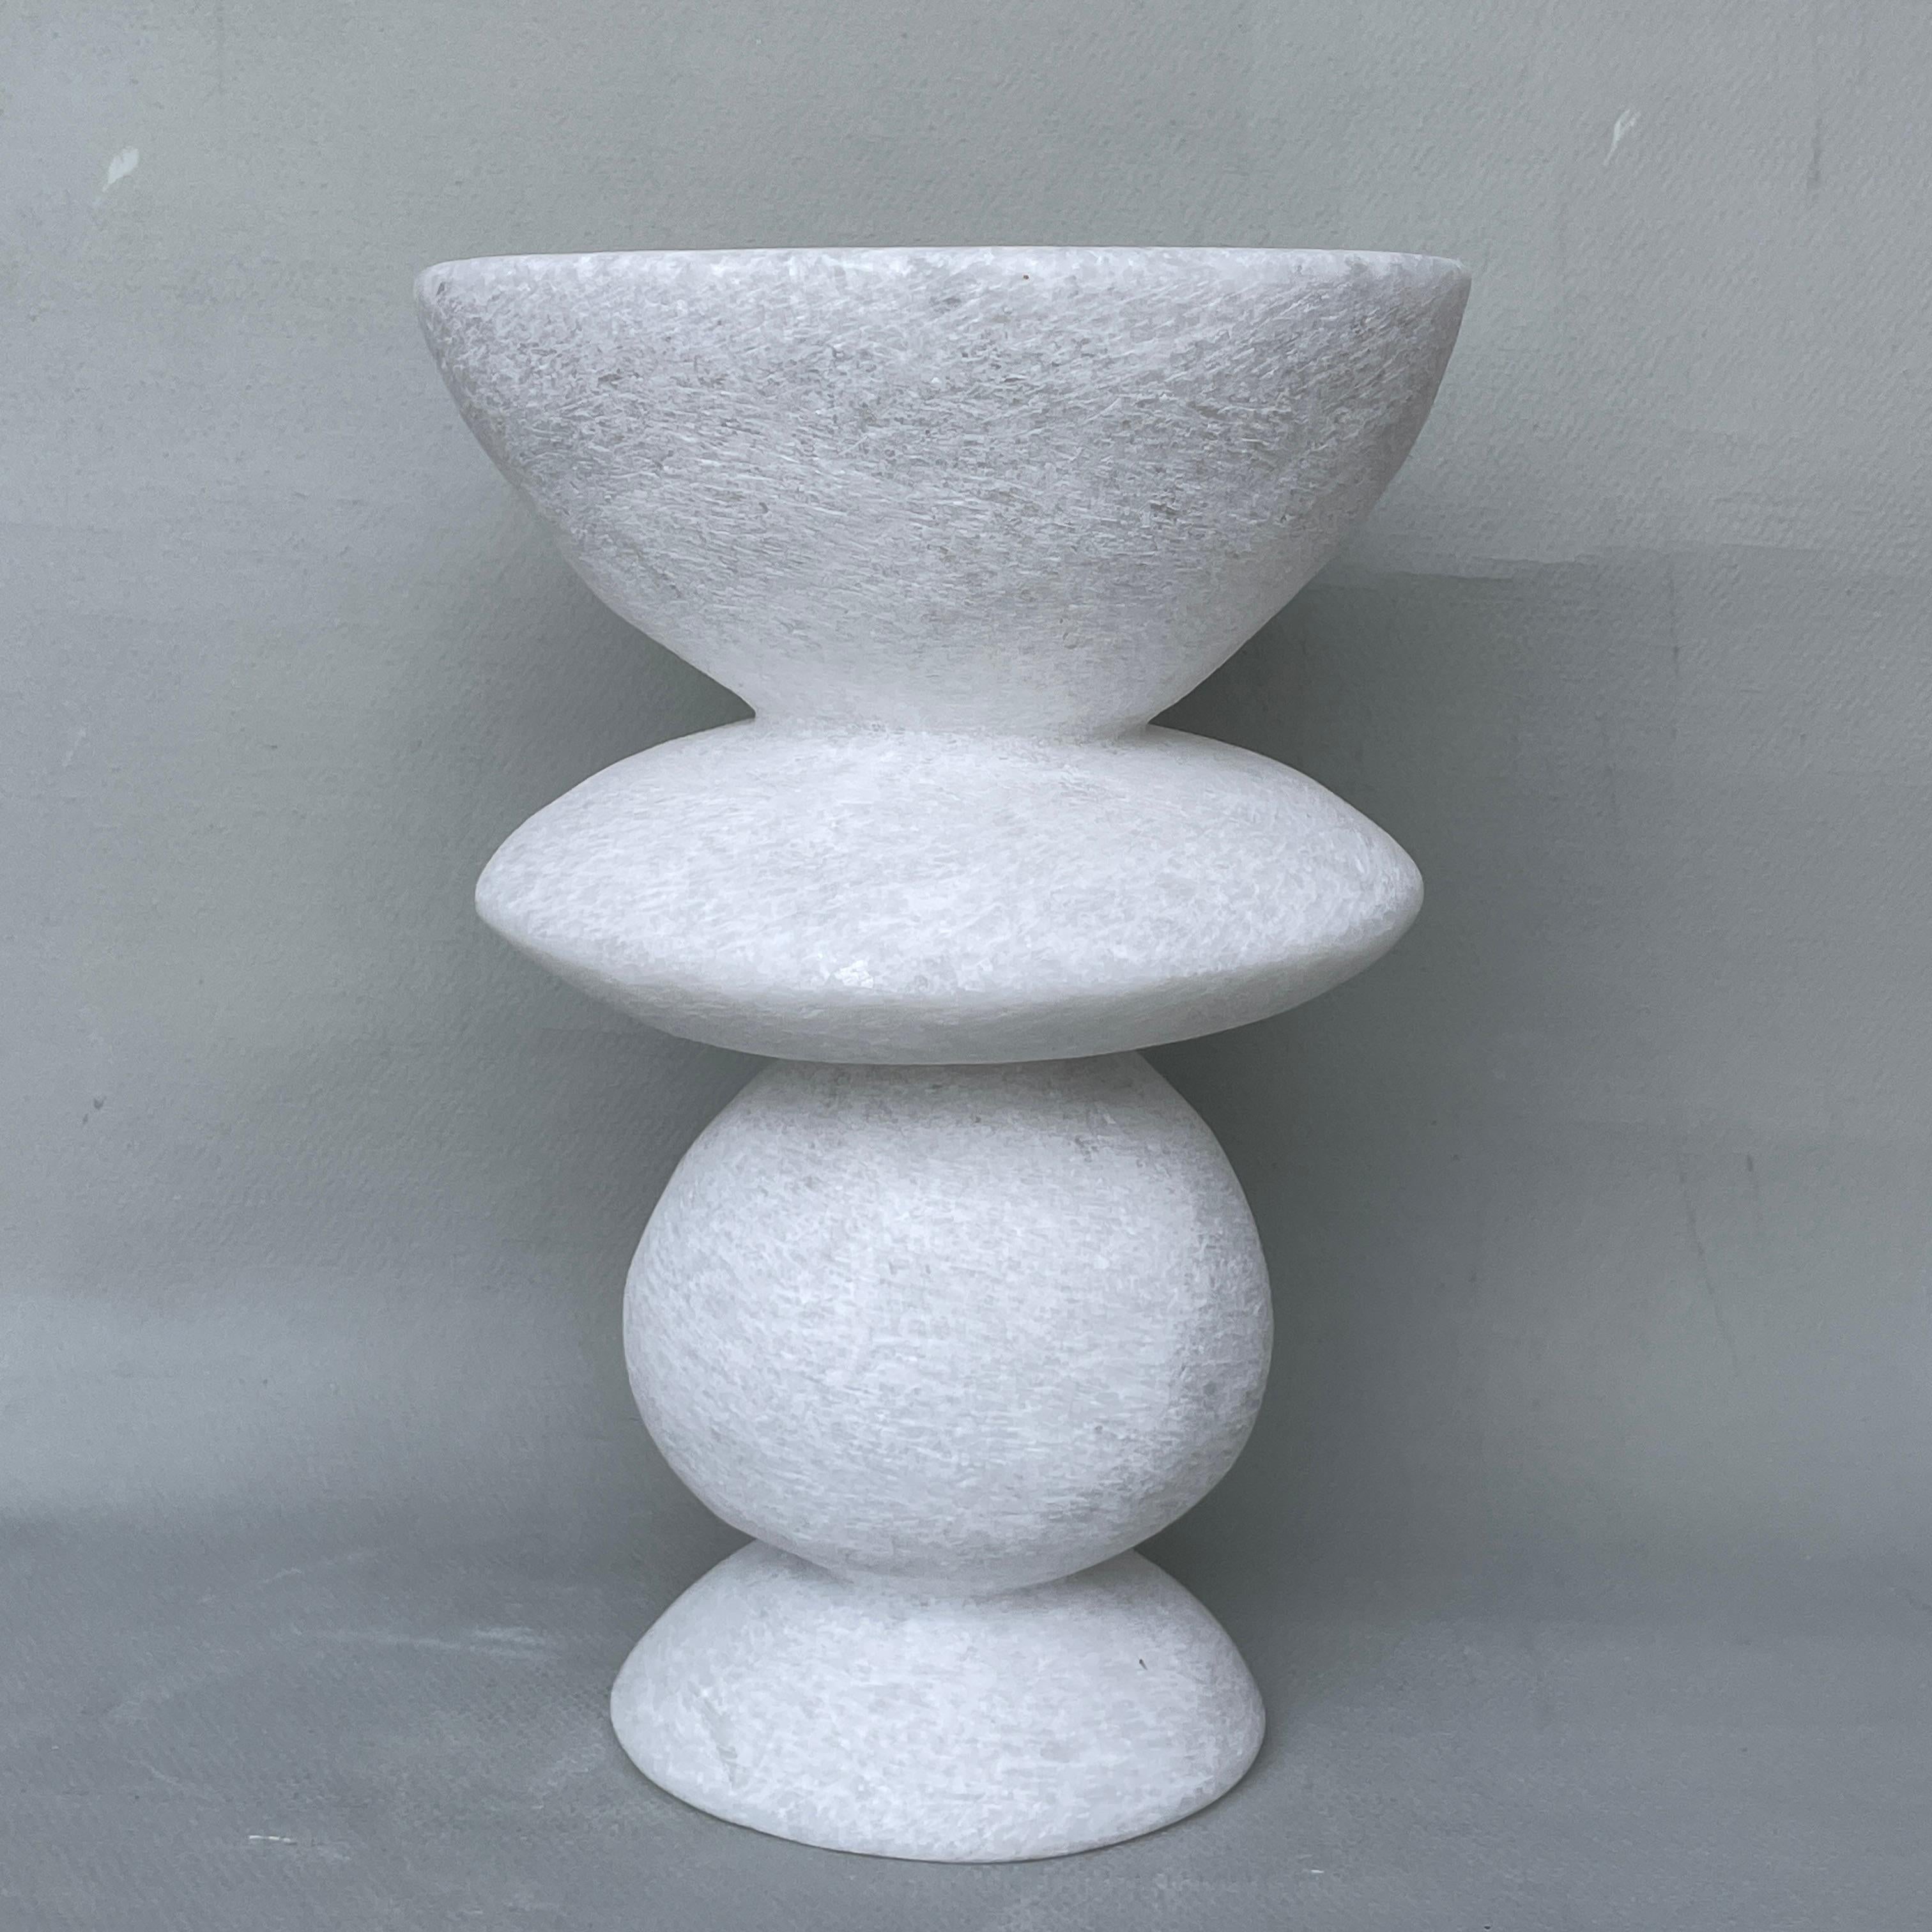 Unique Naxian Marble Vessel by Tom Von Kaenel
Unique piece.
Dimensions: Ø 17 x H 25 cm.
Materials: Naxian marble.

The surfaces of the objects are not sealed, they are not protected against acid. The lines of the handcraft are visible it gives